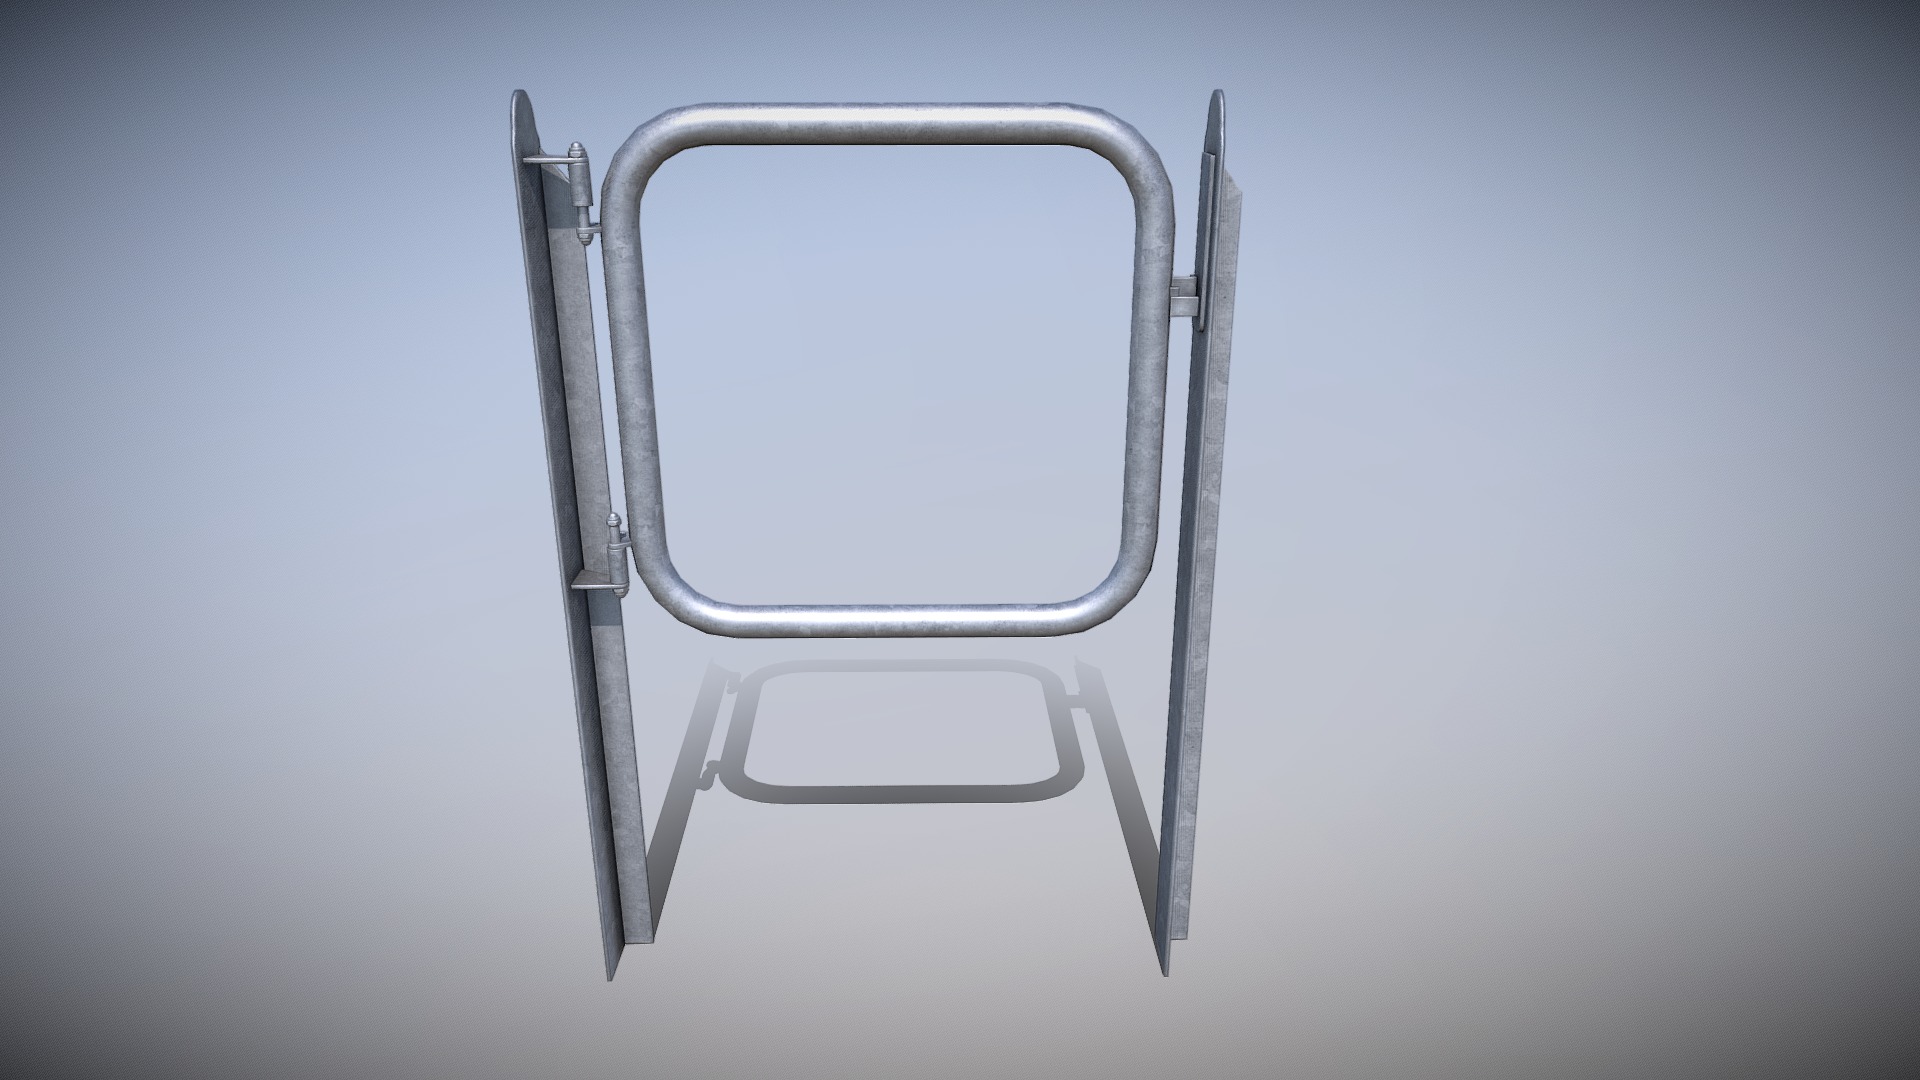 3D model Small Steel Railing Door (Low-Poly) - This is a 3D model of the Small Steel Railing Door (Low-Poly). The 3D model is about a chair with a metal frame.